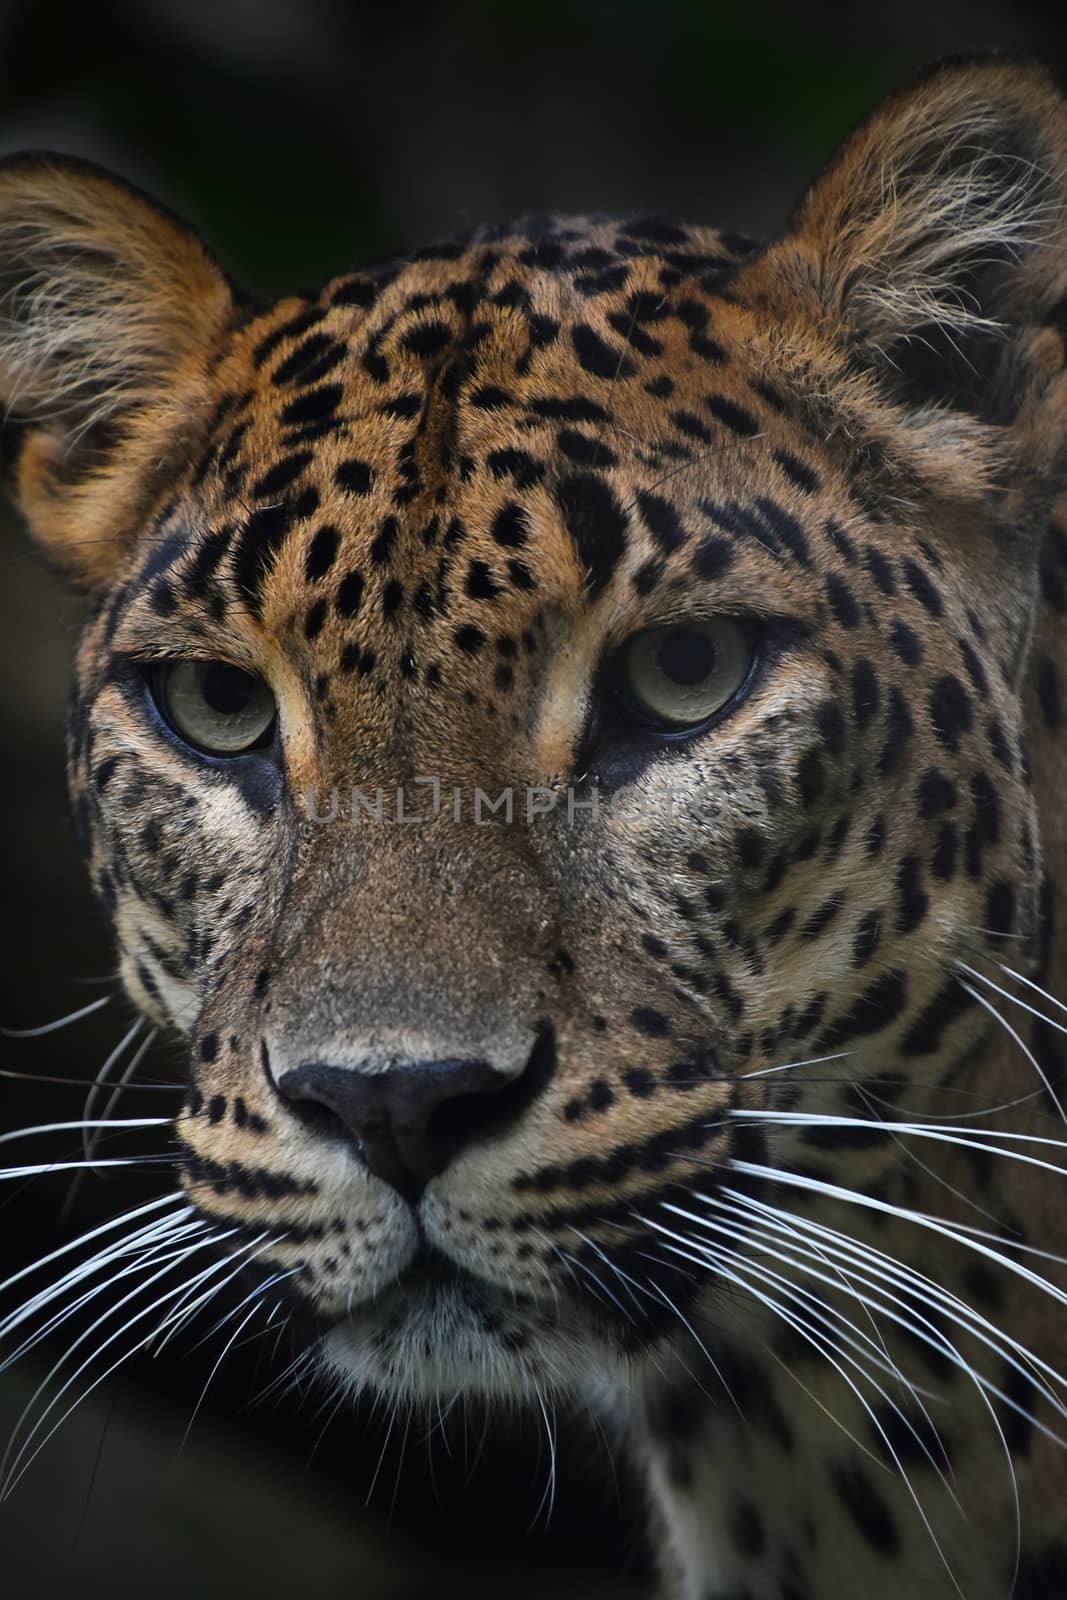 Face to face close up portrait of Persian leopard (Panthera pardus saxicolor) looking at camera, low angle view